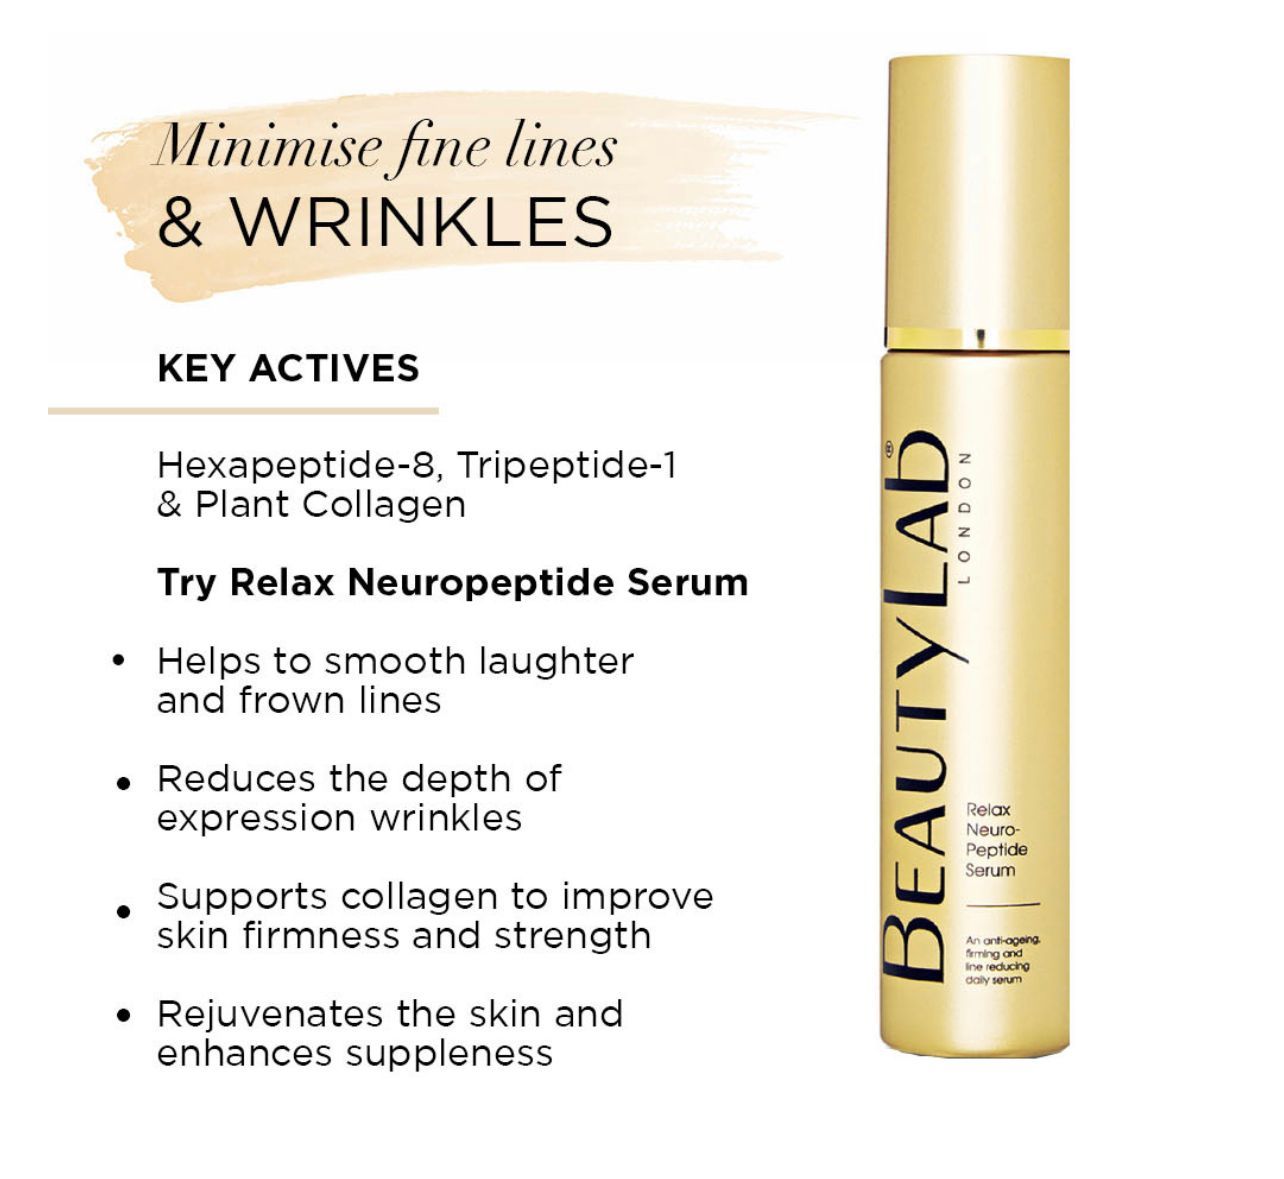 Relax Neuro Peptide Serum and words describing the benefits